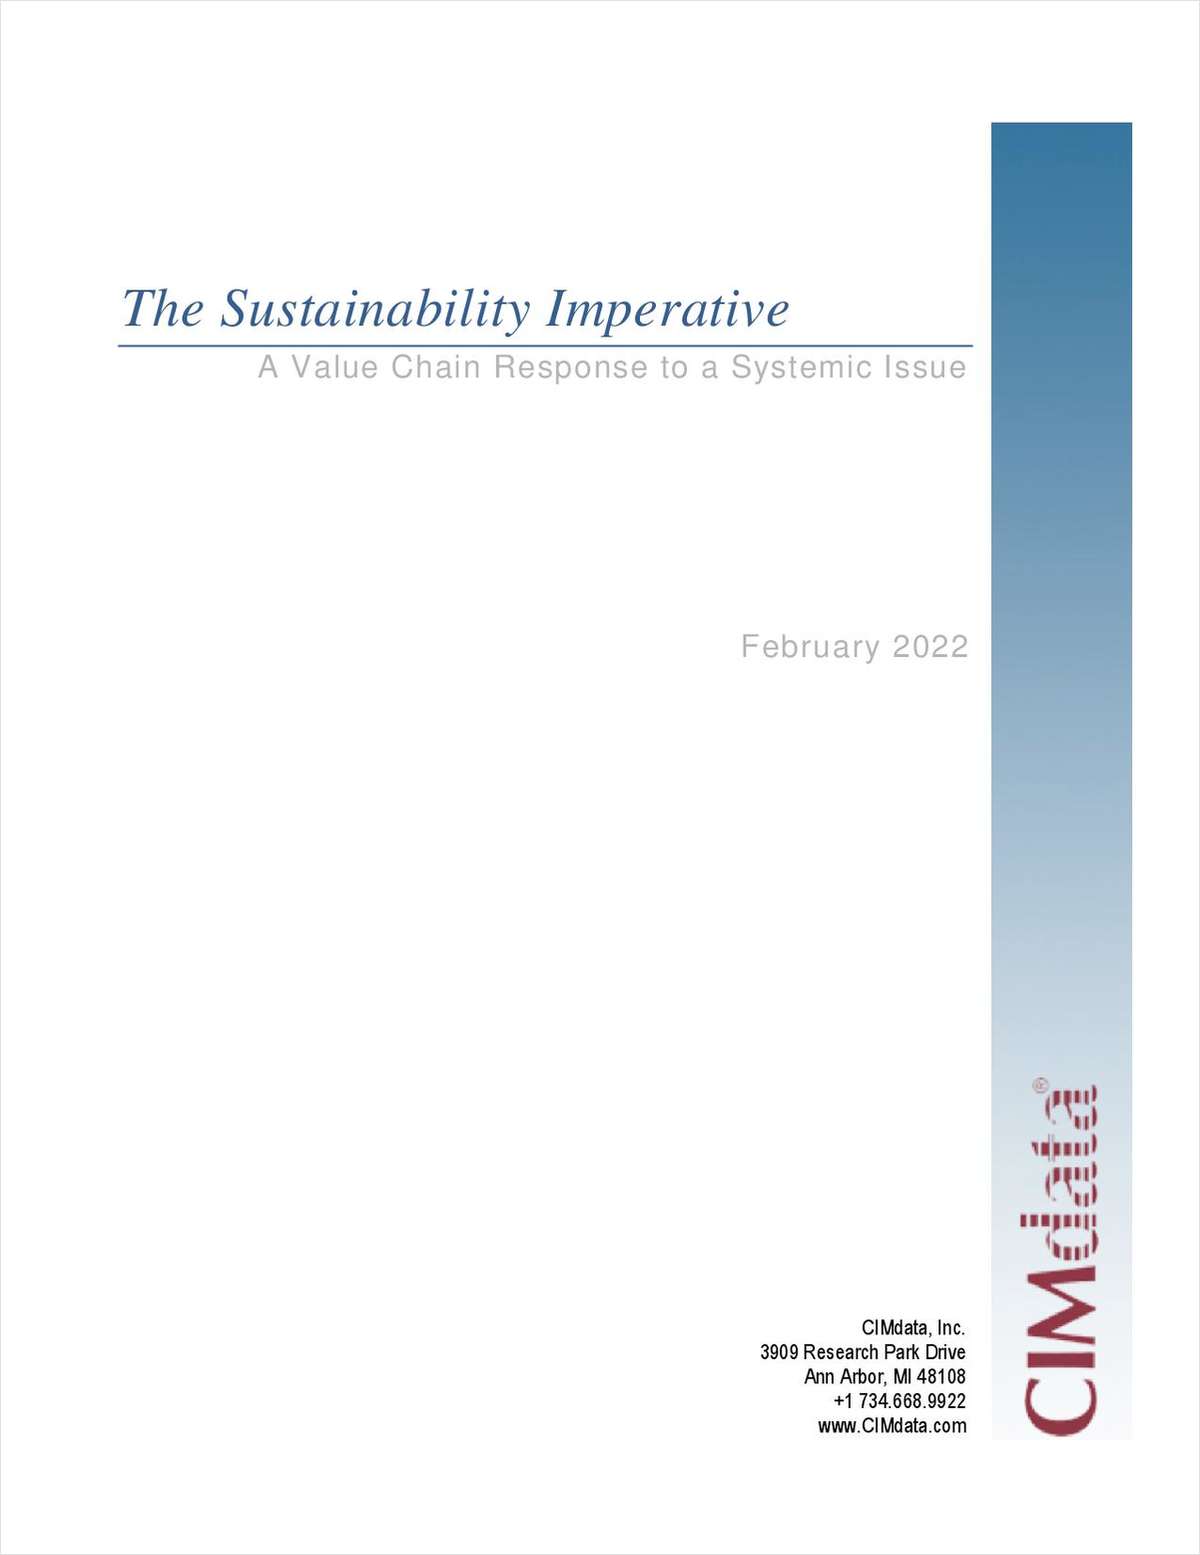 The Sustainability Imperative; A Value Chain Response to a Systemic Issue